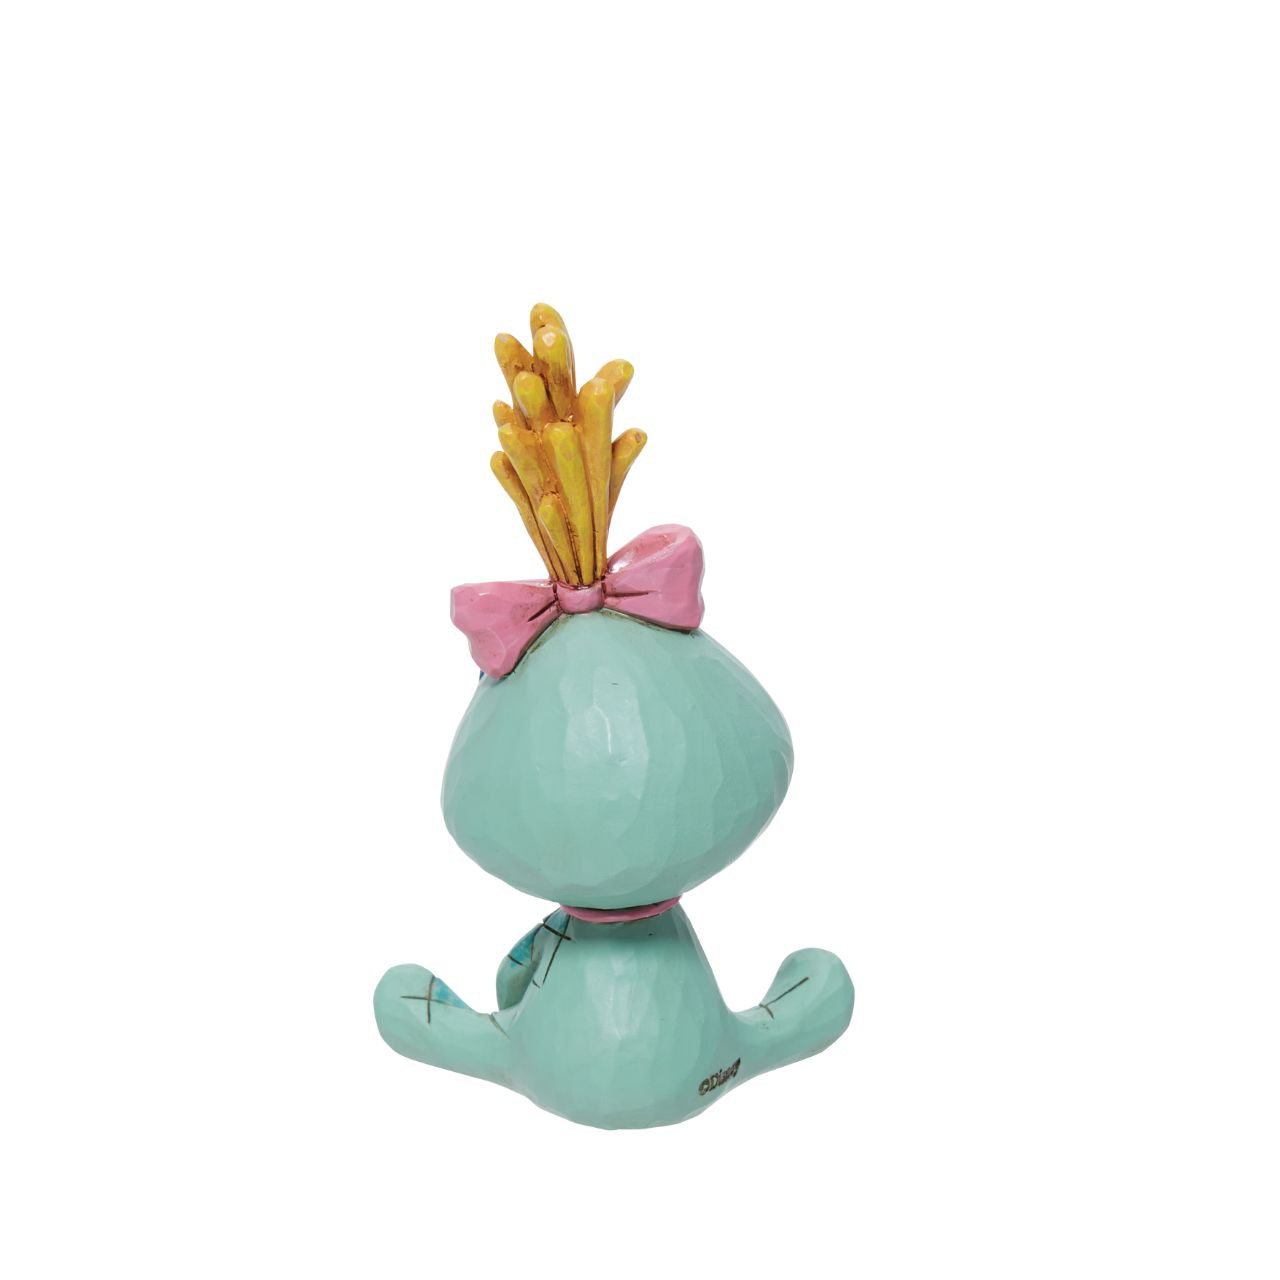 The beloved stuffed toy of Lilo from Disney's Lilo &amp; Stitch, Scrump is an important part of their family &amp; has been immortalised in this cute mini figurine. Designed by award winning artist Jim Shore, hand crafted using high quality cast stone and hand painted. 